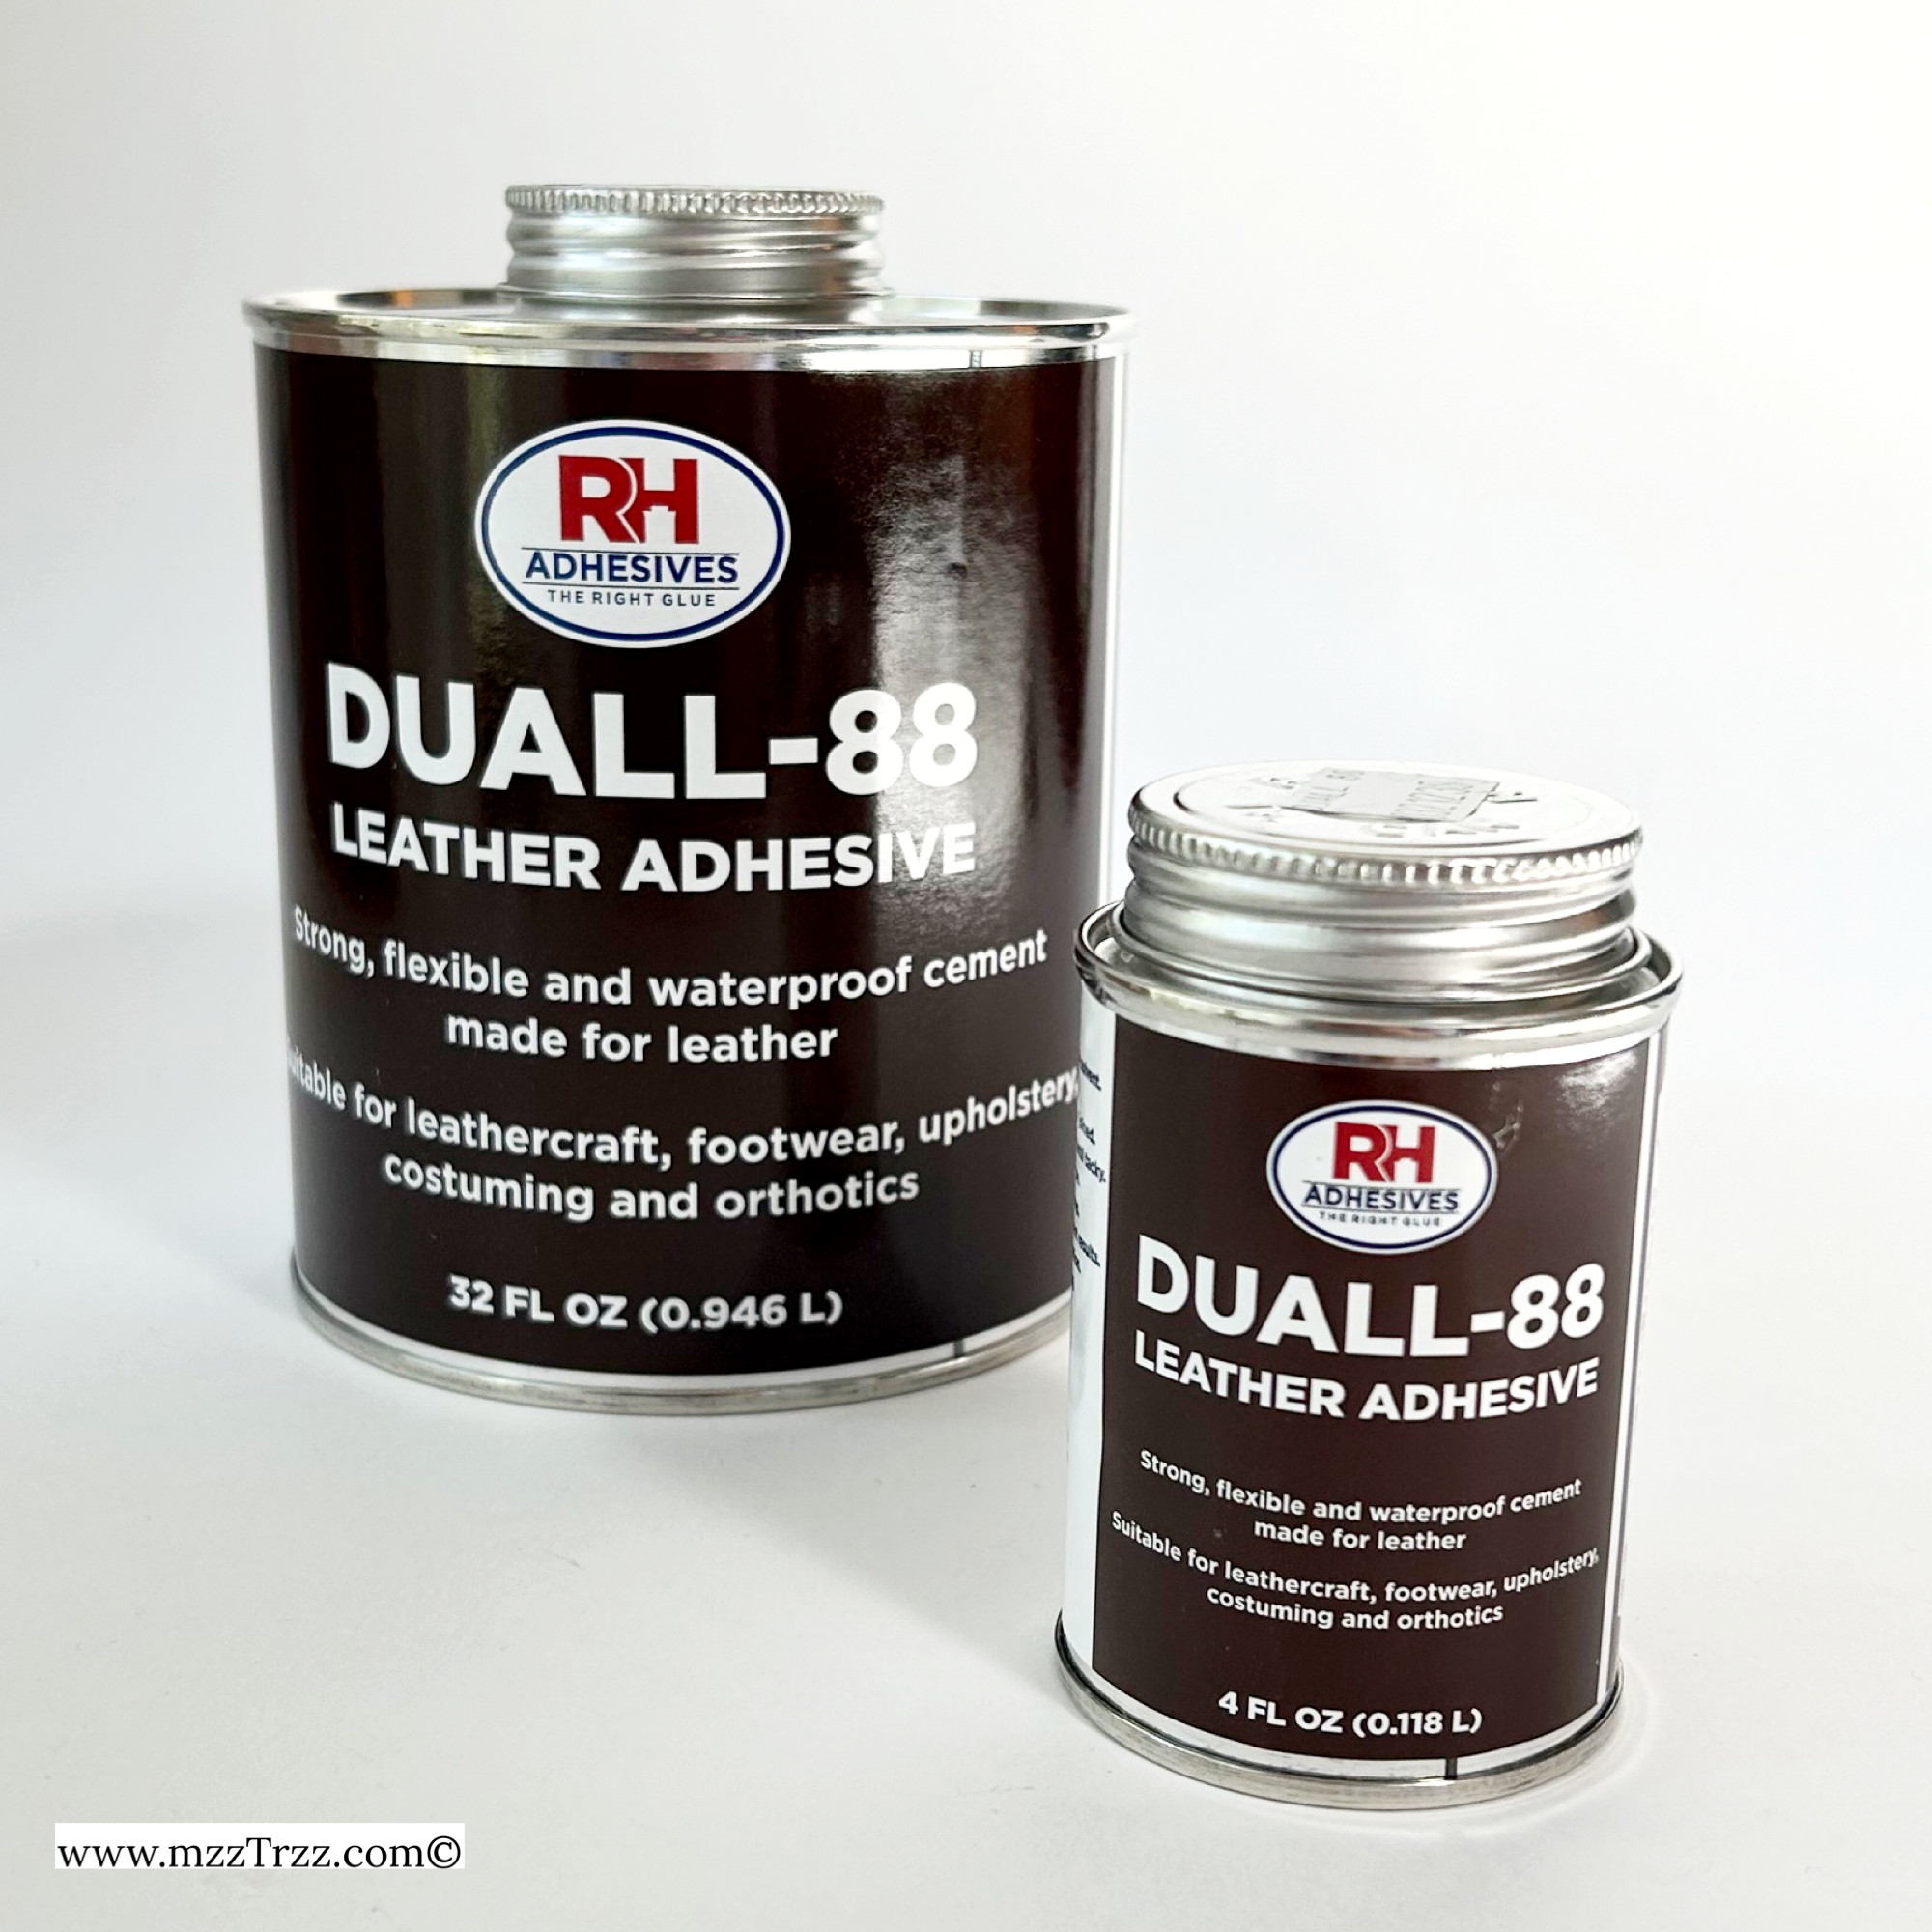 Duall-88 Leather Adhesive, 16 oz. can - RH Adhesives 